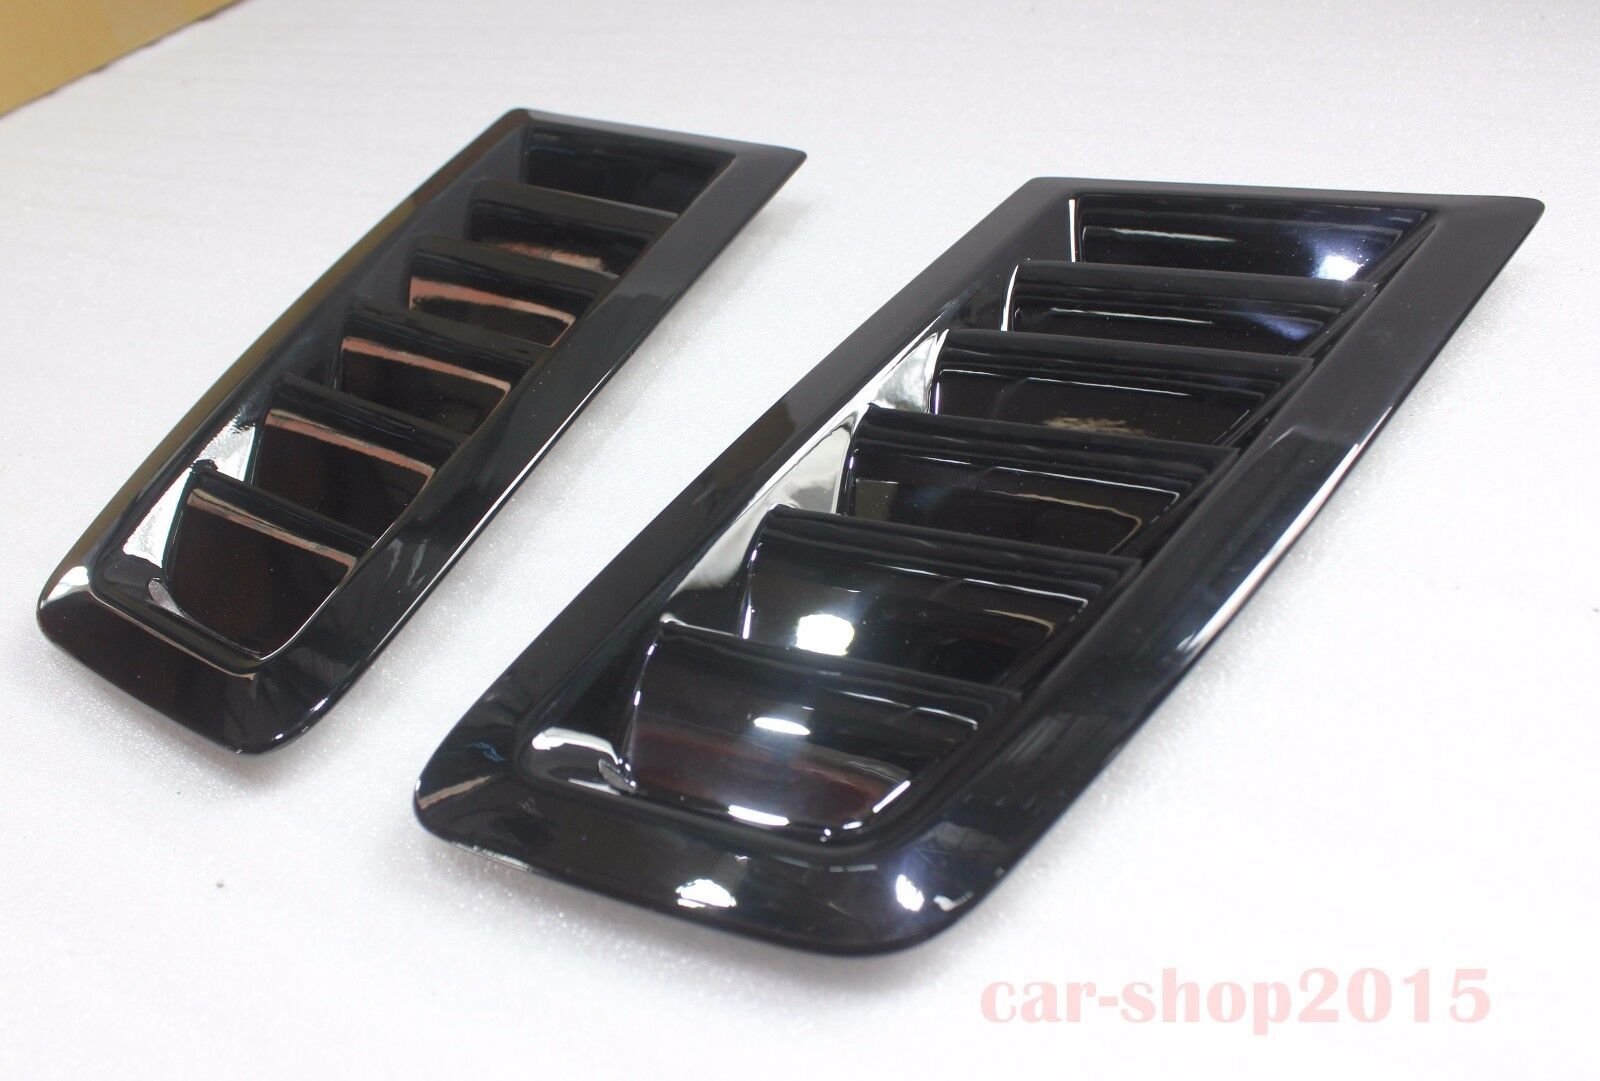 Bonnet Vent Hood Vent FOCUS RS MK2 Style ABS Plastic Universal Ford Glossy Black